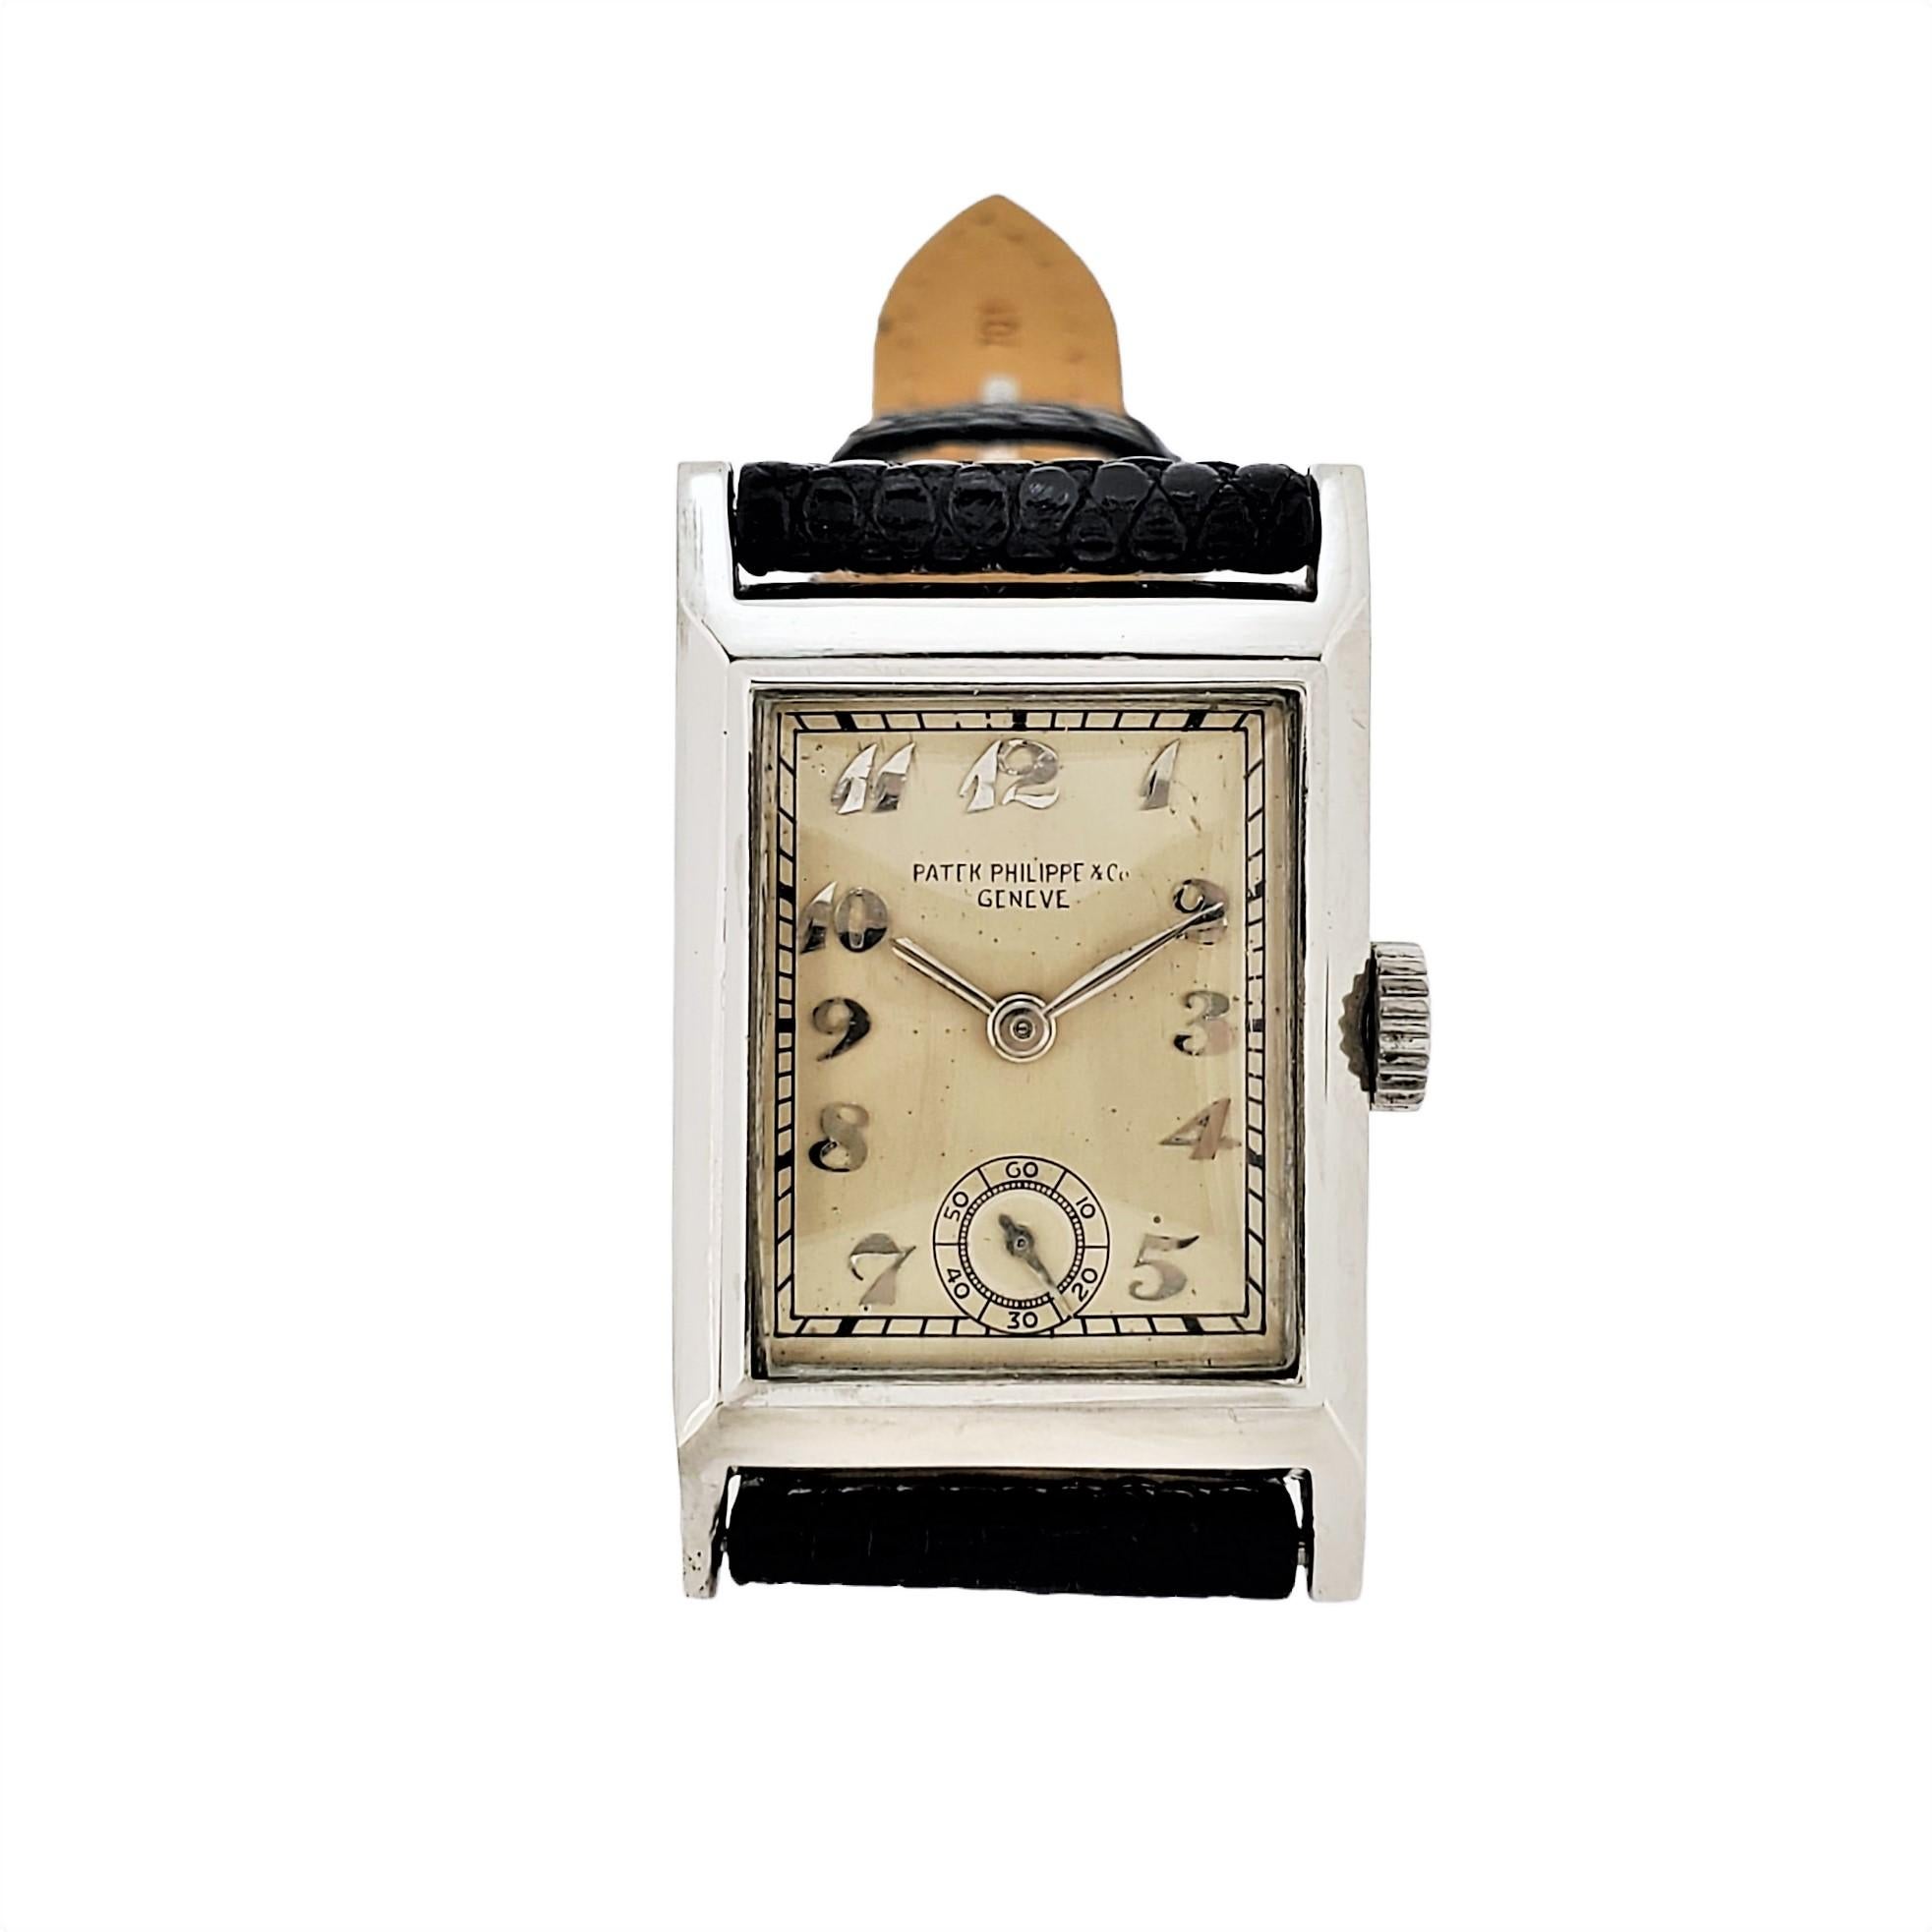 Patek Philippe Early Platinum Art Deco Rectangular Tank style watch circa 1930's In Good Condition For Sale In Santa Monica, CA